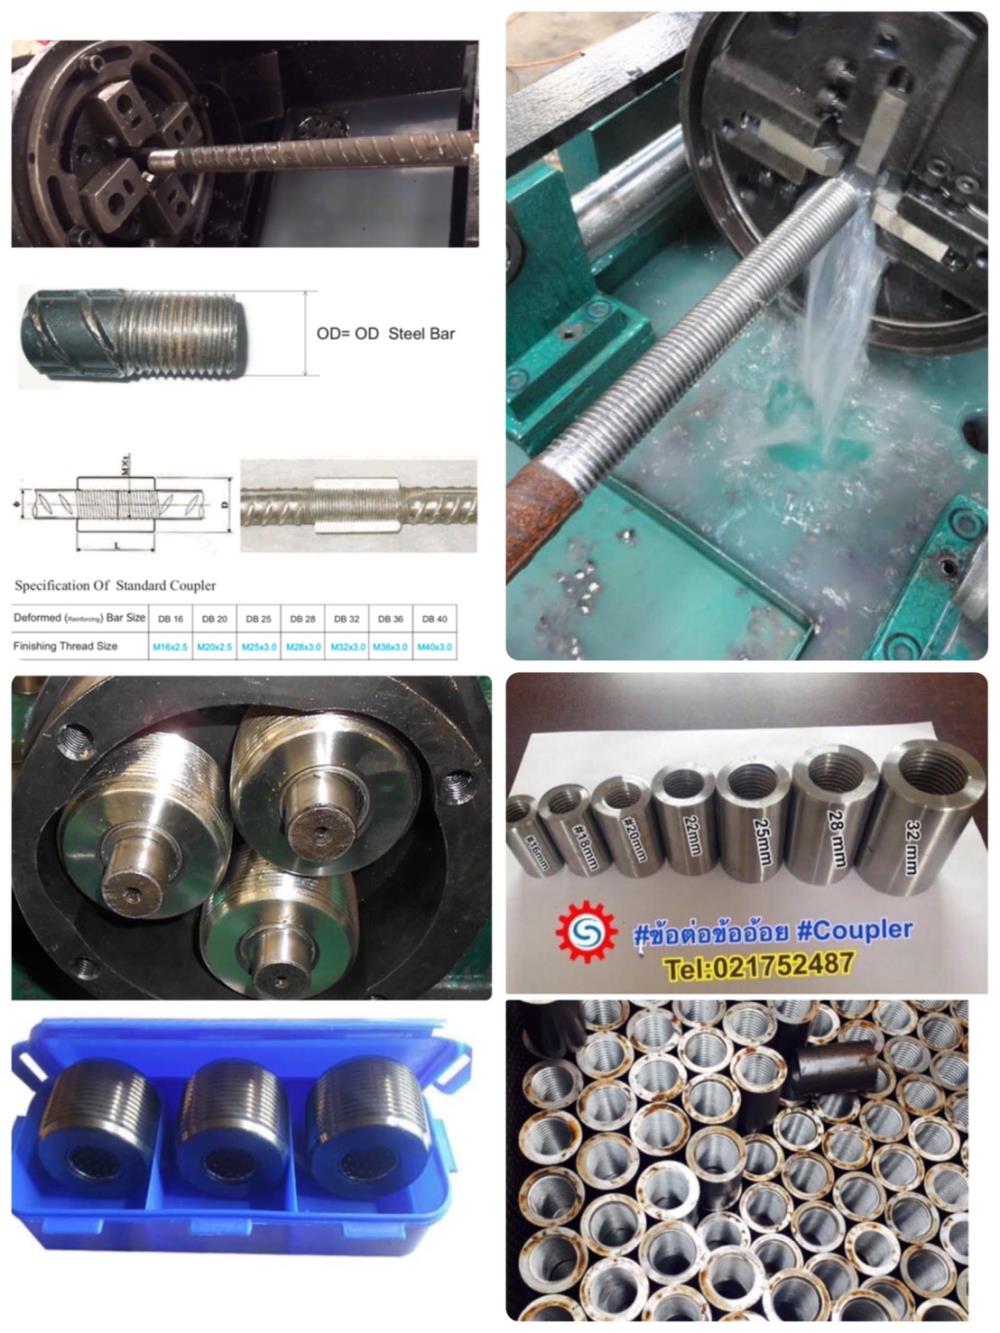 Rebar and Coupler for construction Threading,DB16,DB18,DB20,DB28,DB32,DB36,DB40,Threading,Rebar,Coupler,,HGS-40D,HGS-40DS,HGS-40DZ,HGS-40K,HGS-40KZ,HDCJ-32S,  HGS-40DZS,HGS-40KZS  Thailand ประเทศไทย,Construction and Decoration/Building Metallic Materials